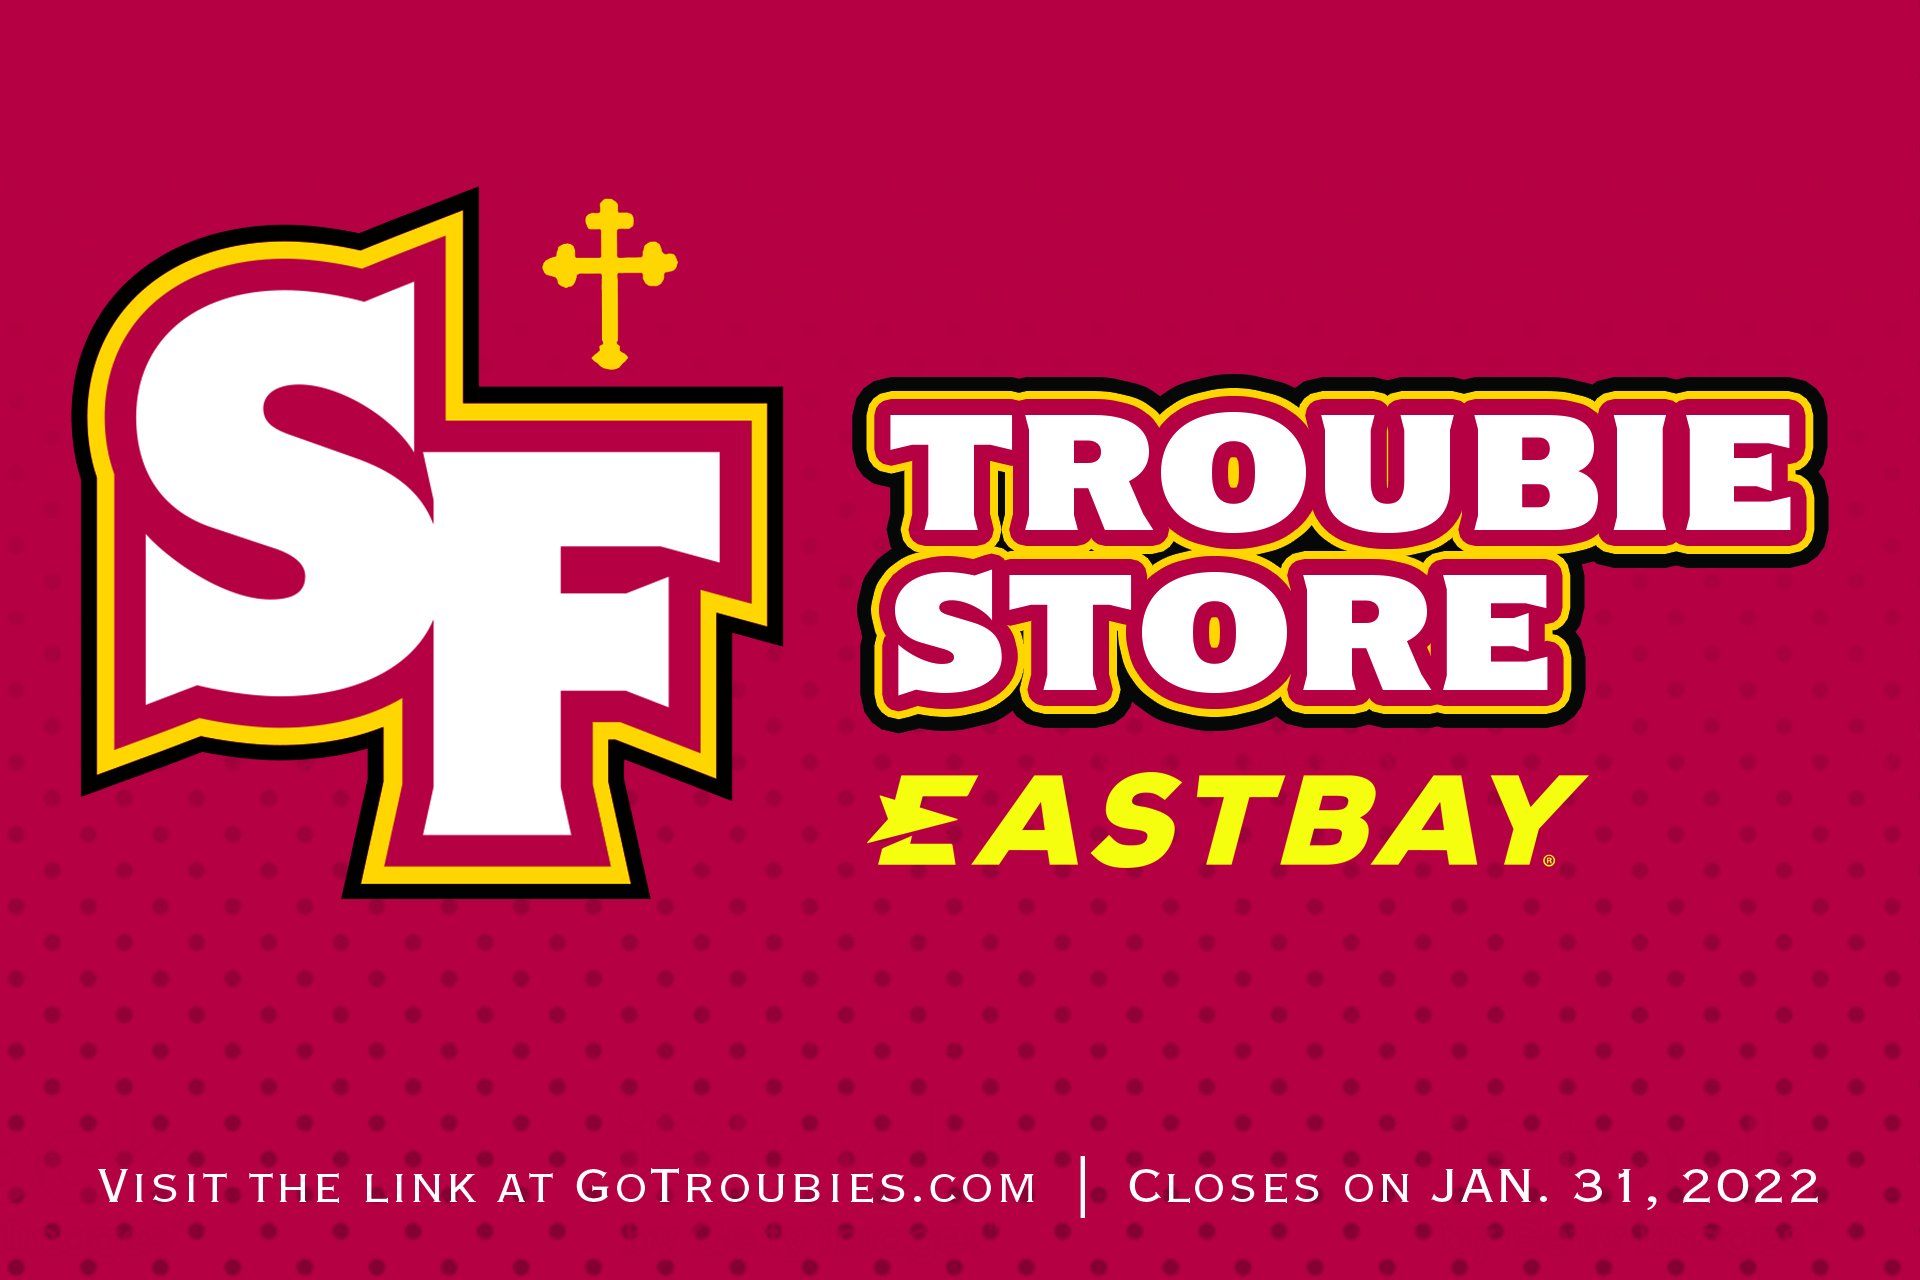 Eastbay Troubie Store open for business!